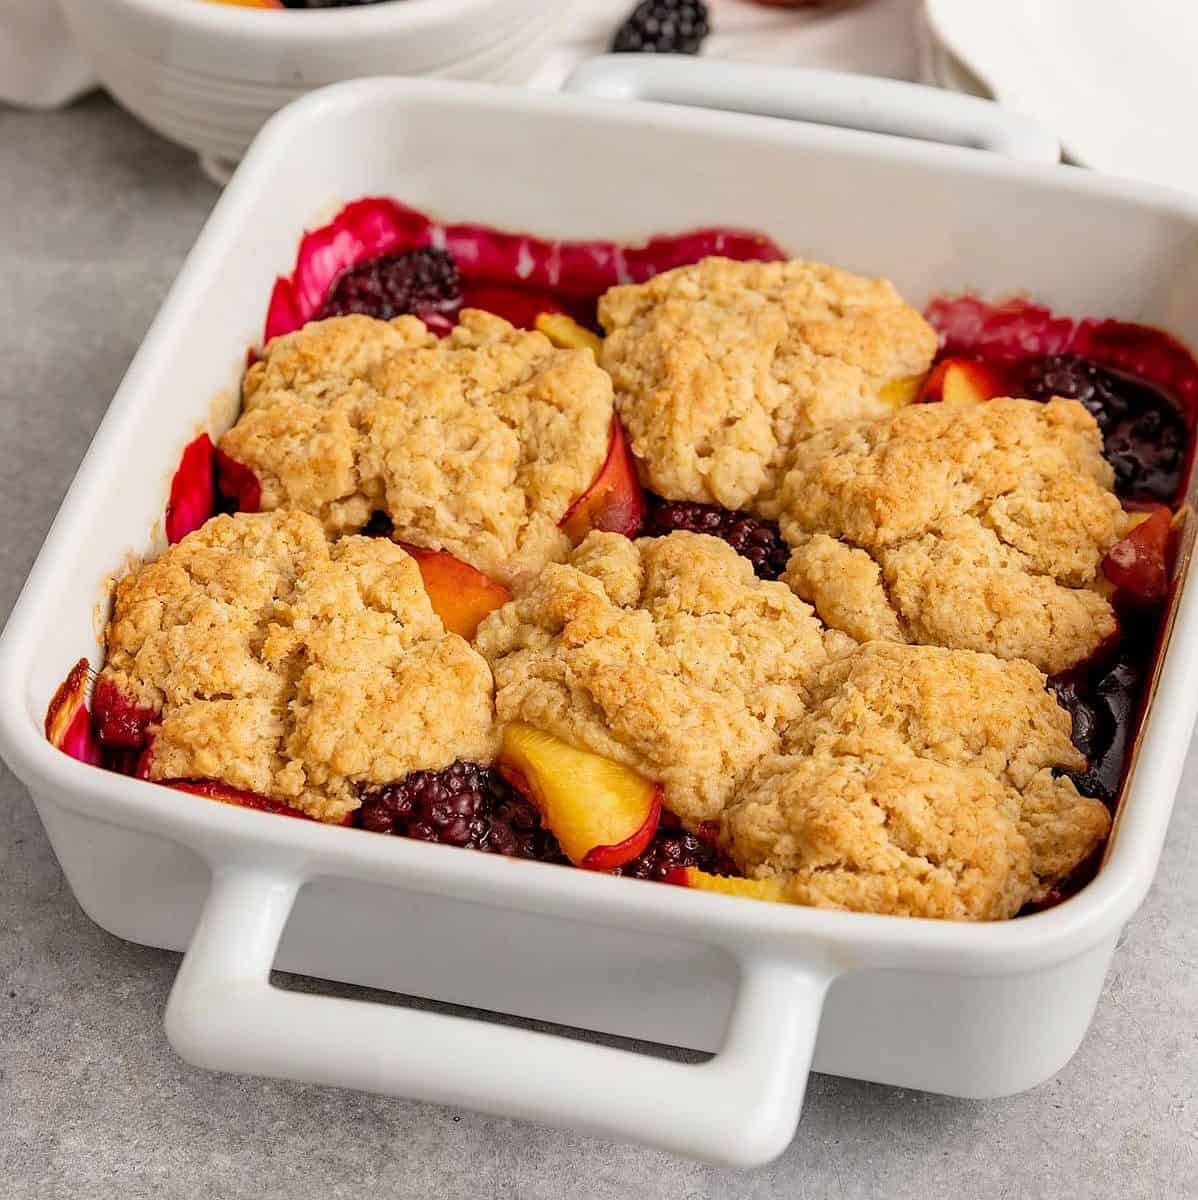  This flavorful and fruity cobbler is perfect for showcasing the best of summer's bounty.